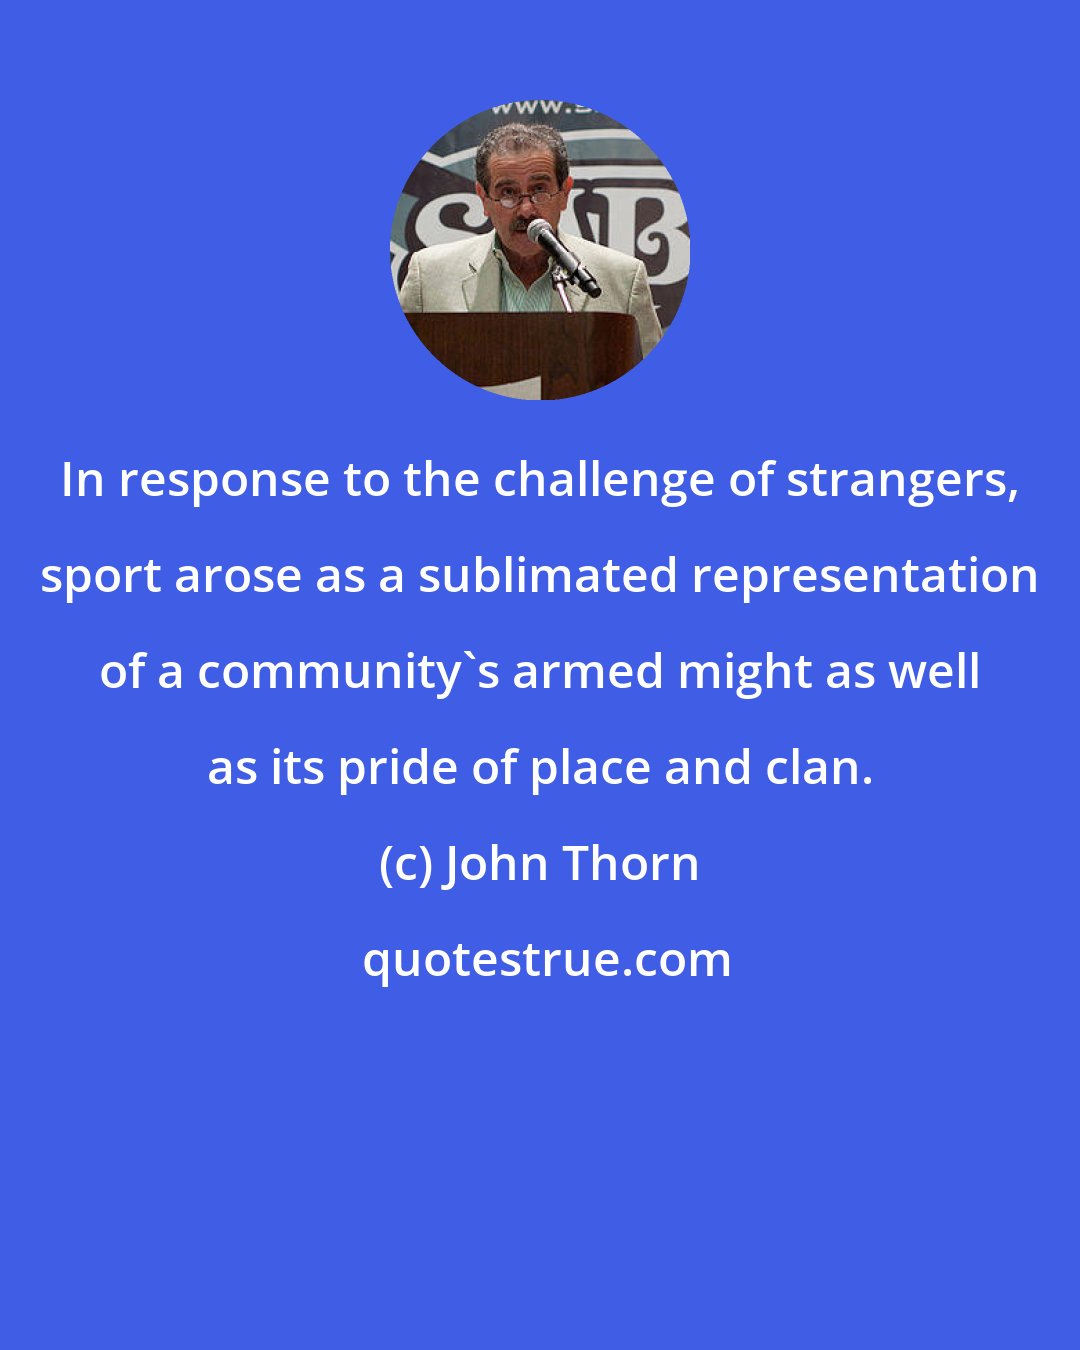 John Thorn: In response to the challenge of strangers, sport arose as a sublimated representation of a community's armed might as well as its pride of place and clan.